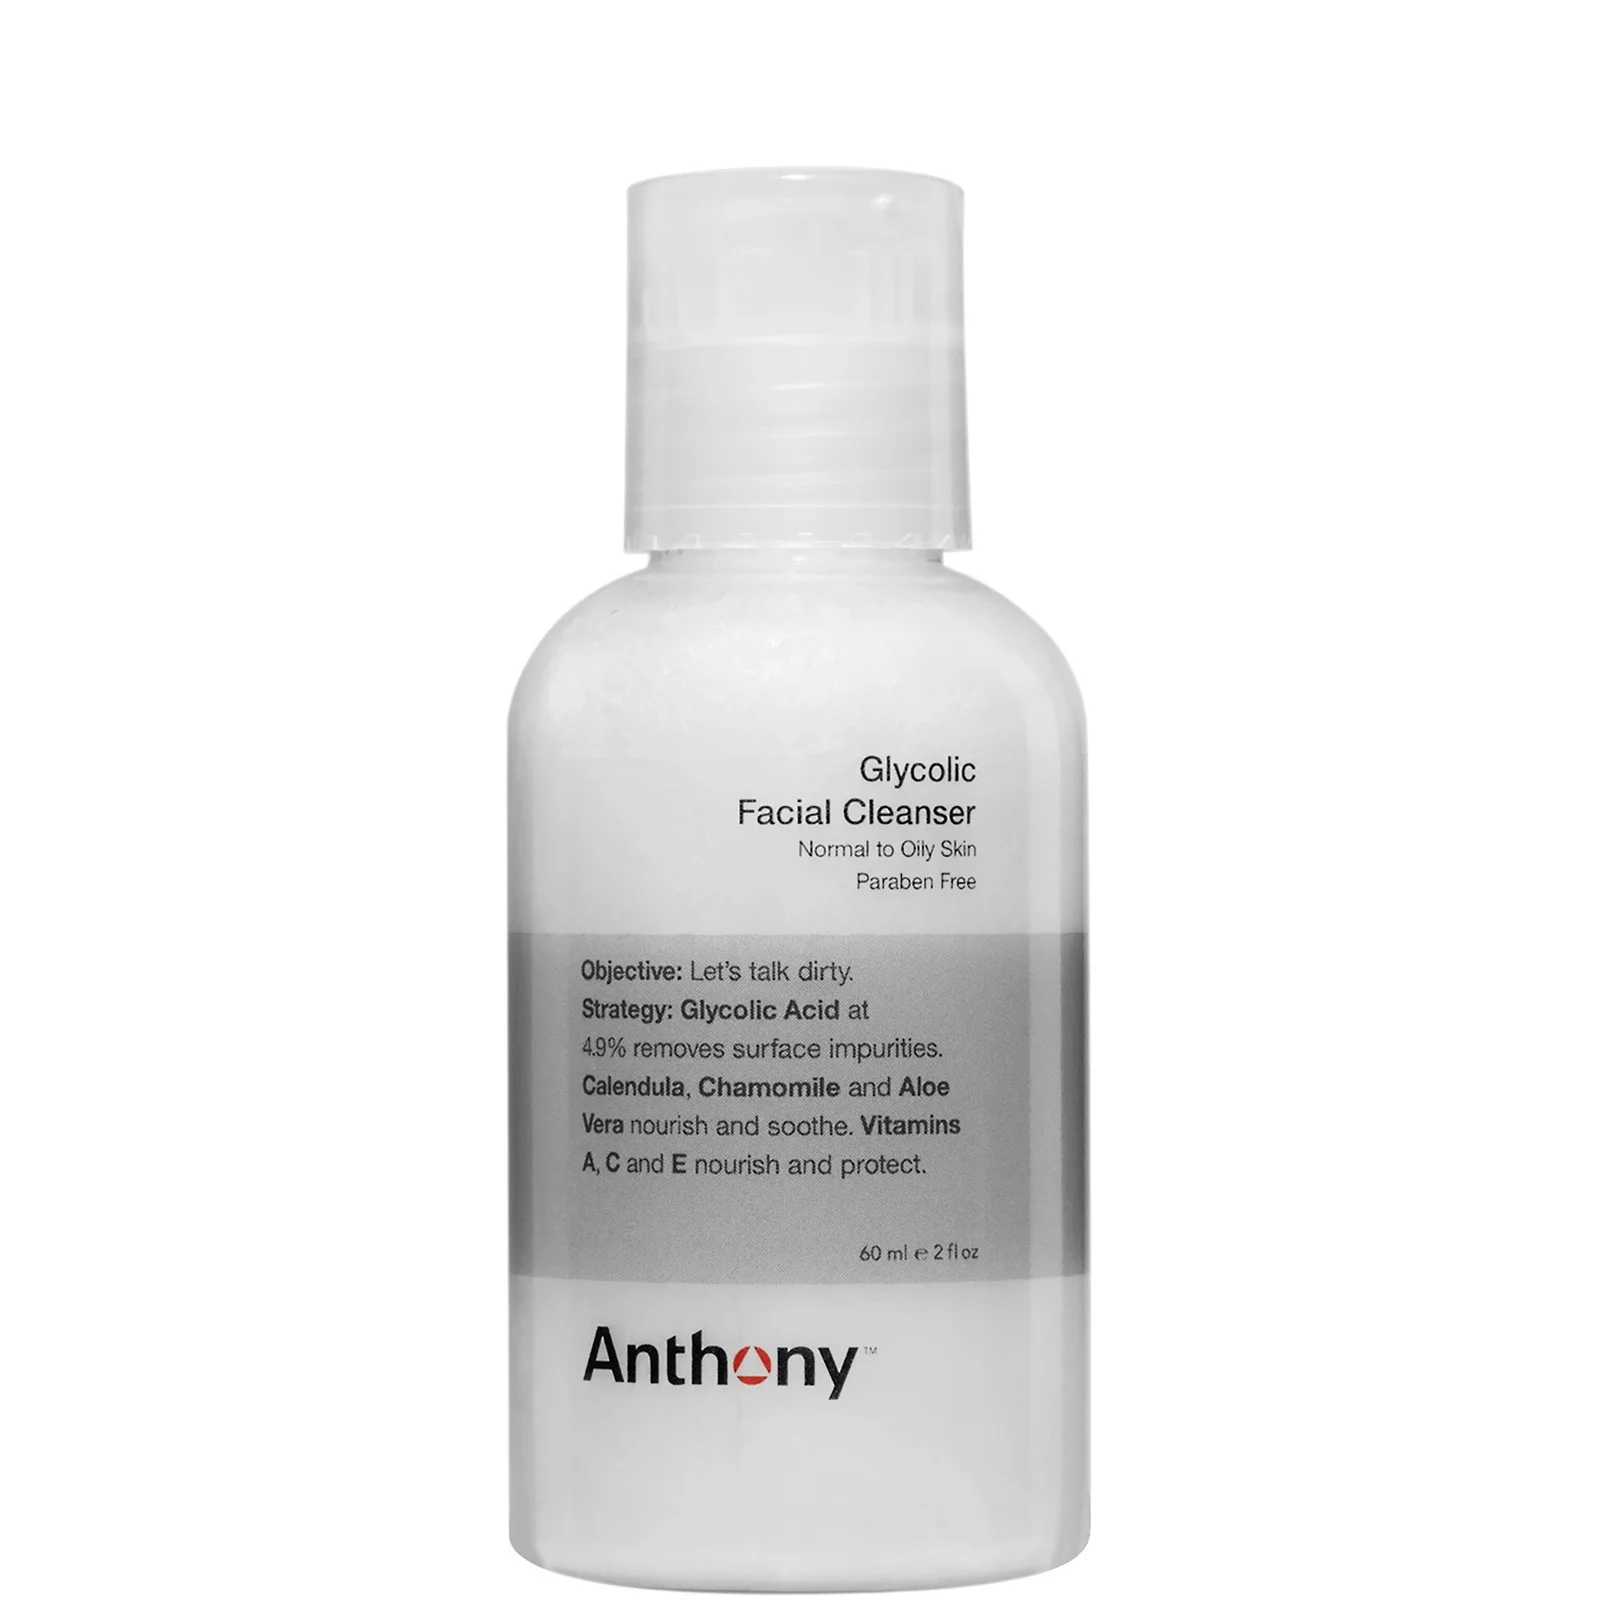 Anthony Glycolic Facial Cleanser 60ml Image 1